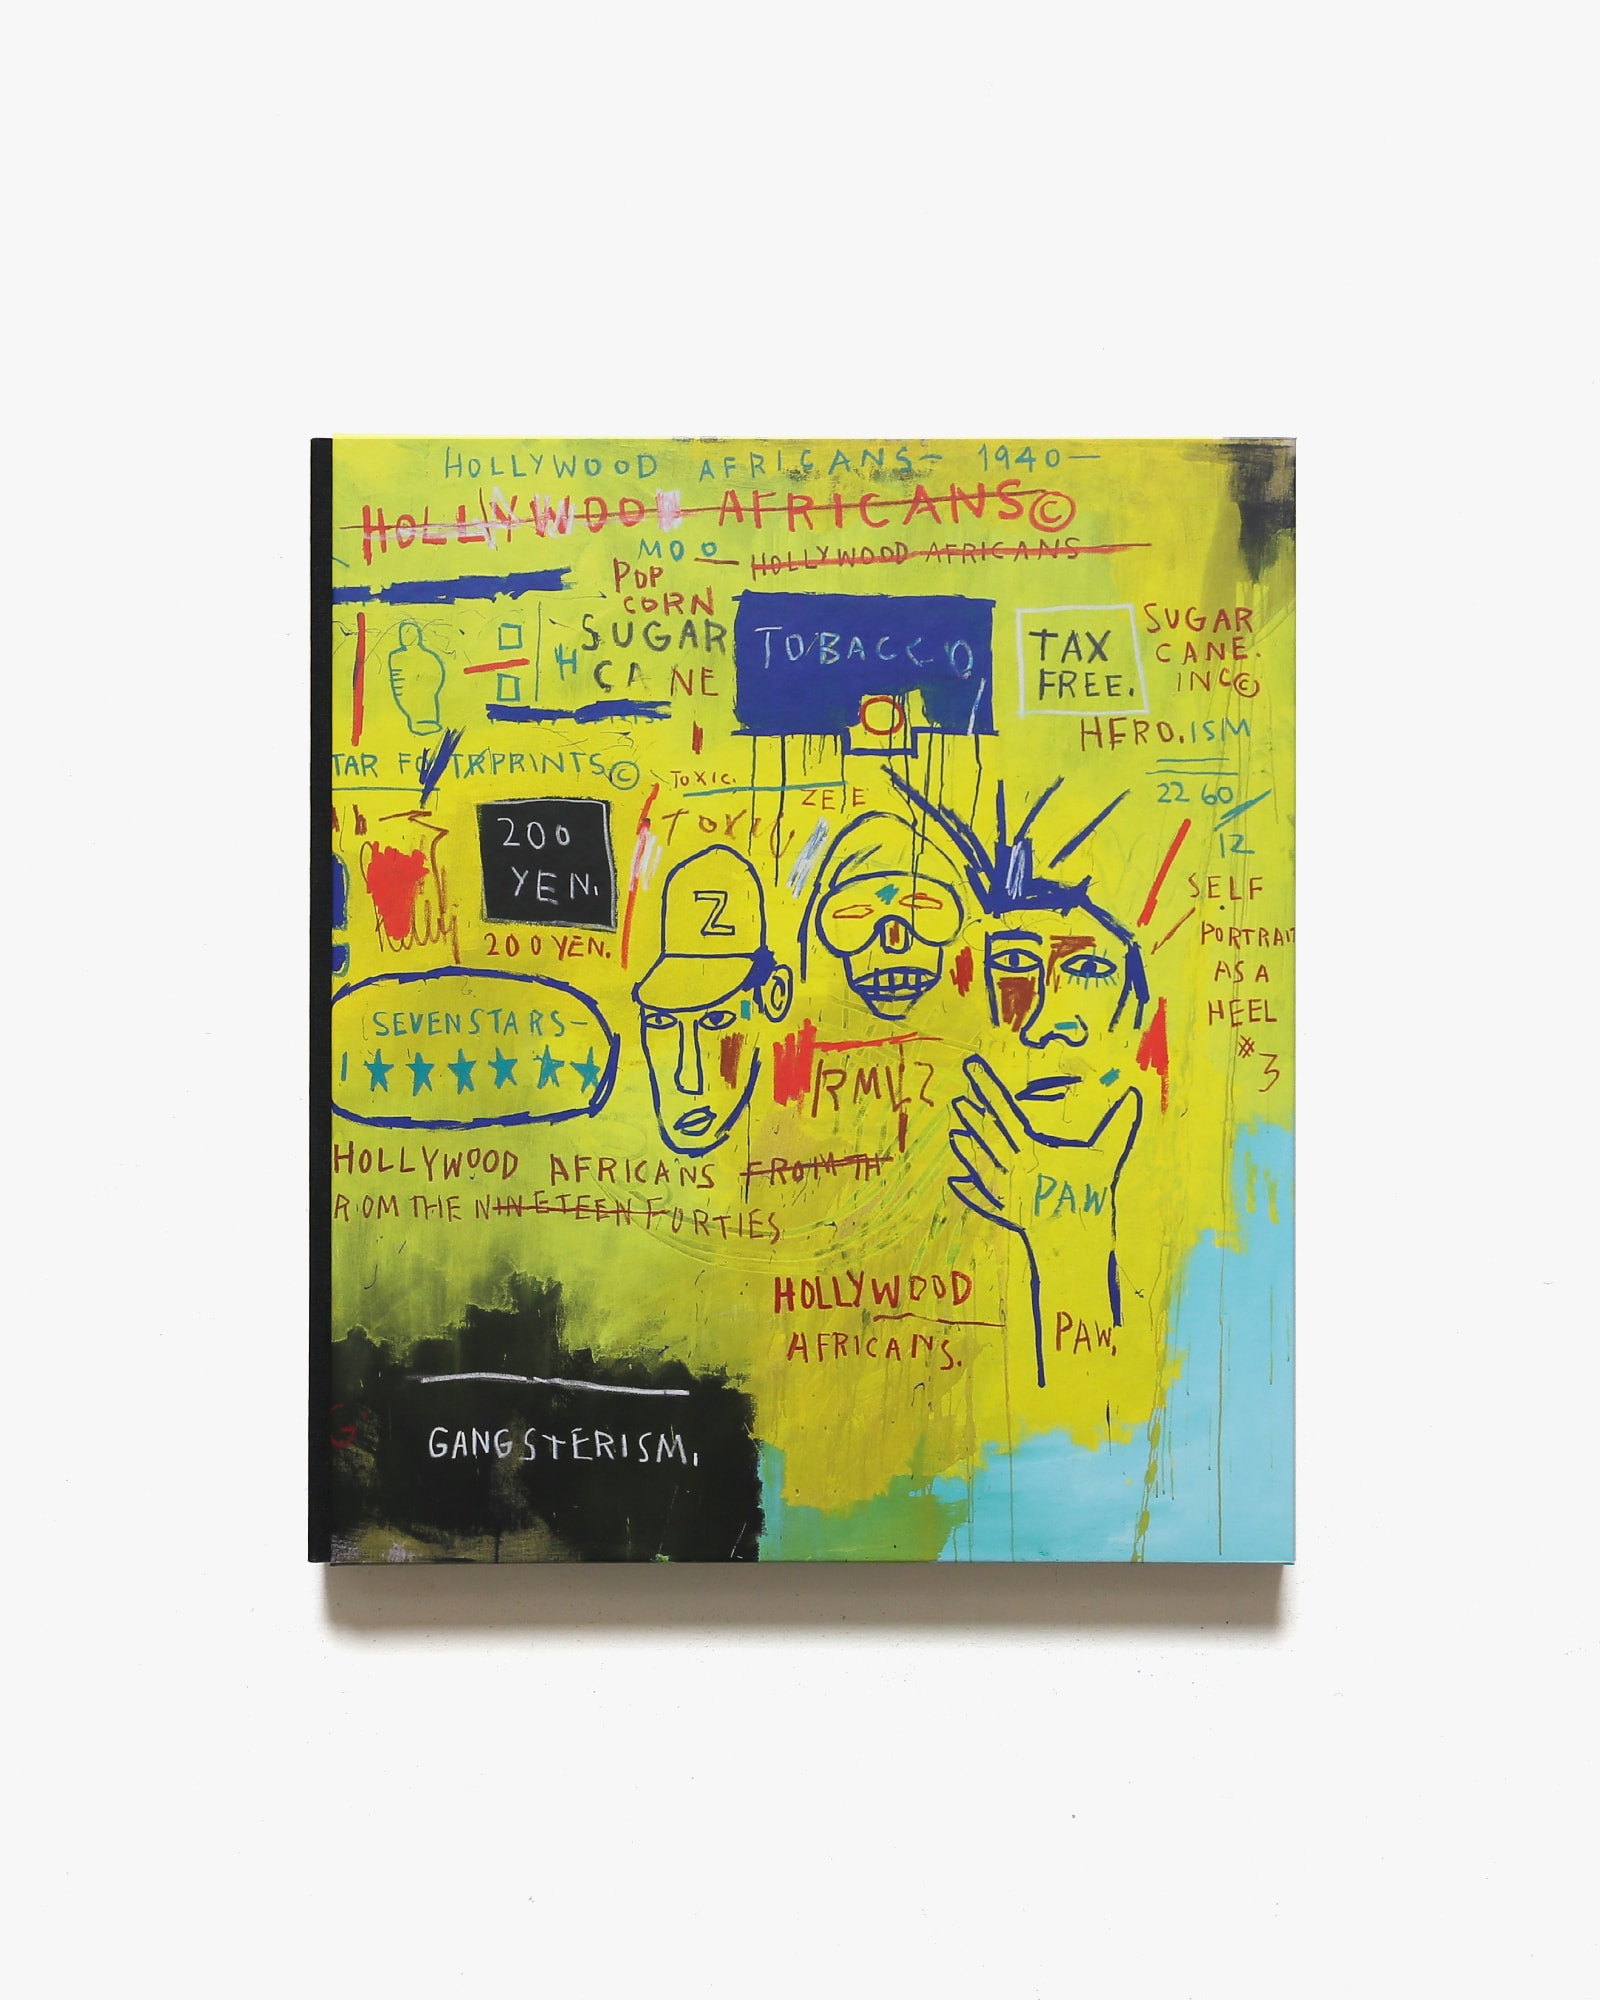 Writing the Future: Basquiat and the Hip-Hop Generation